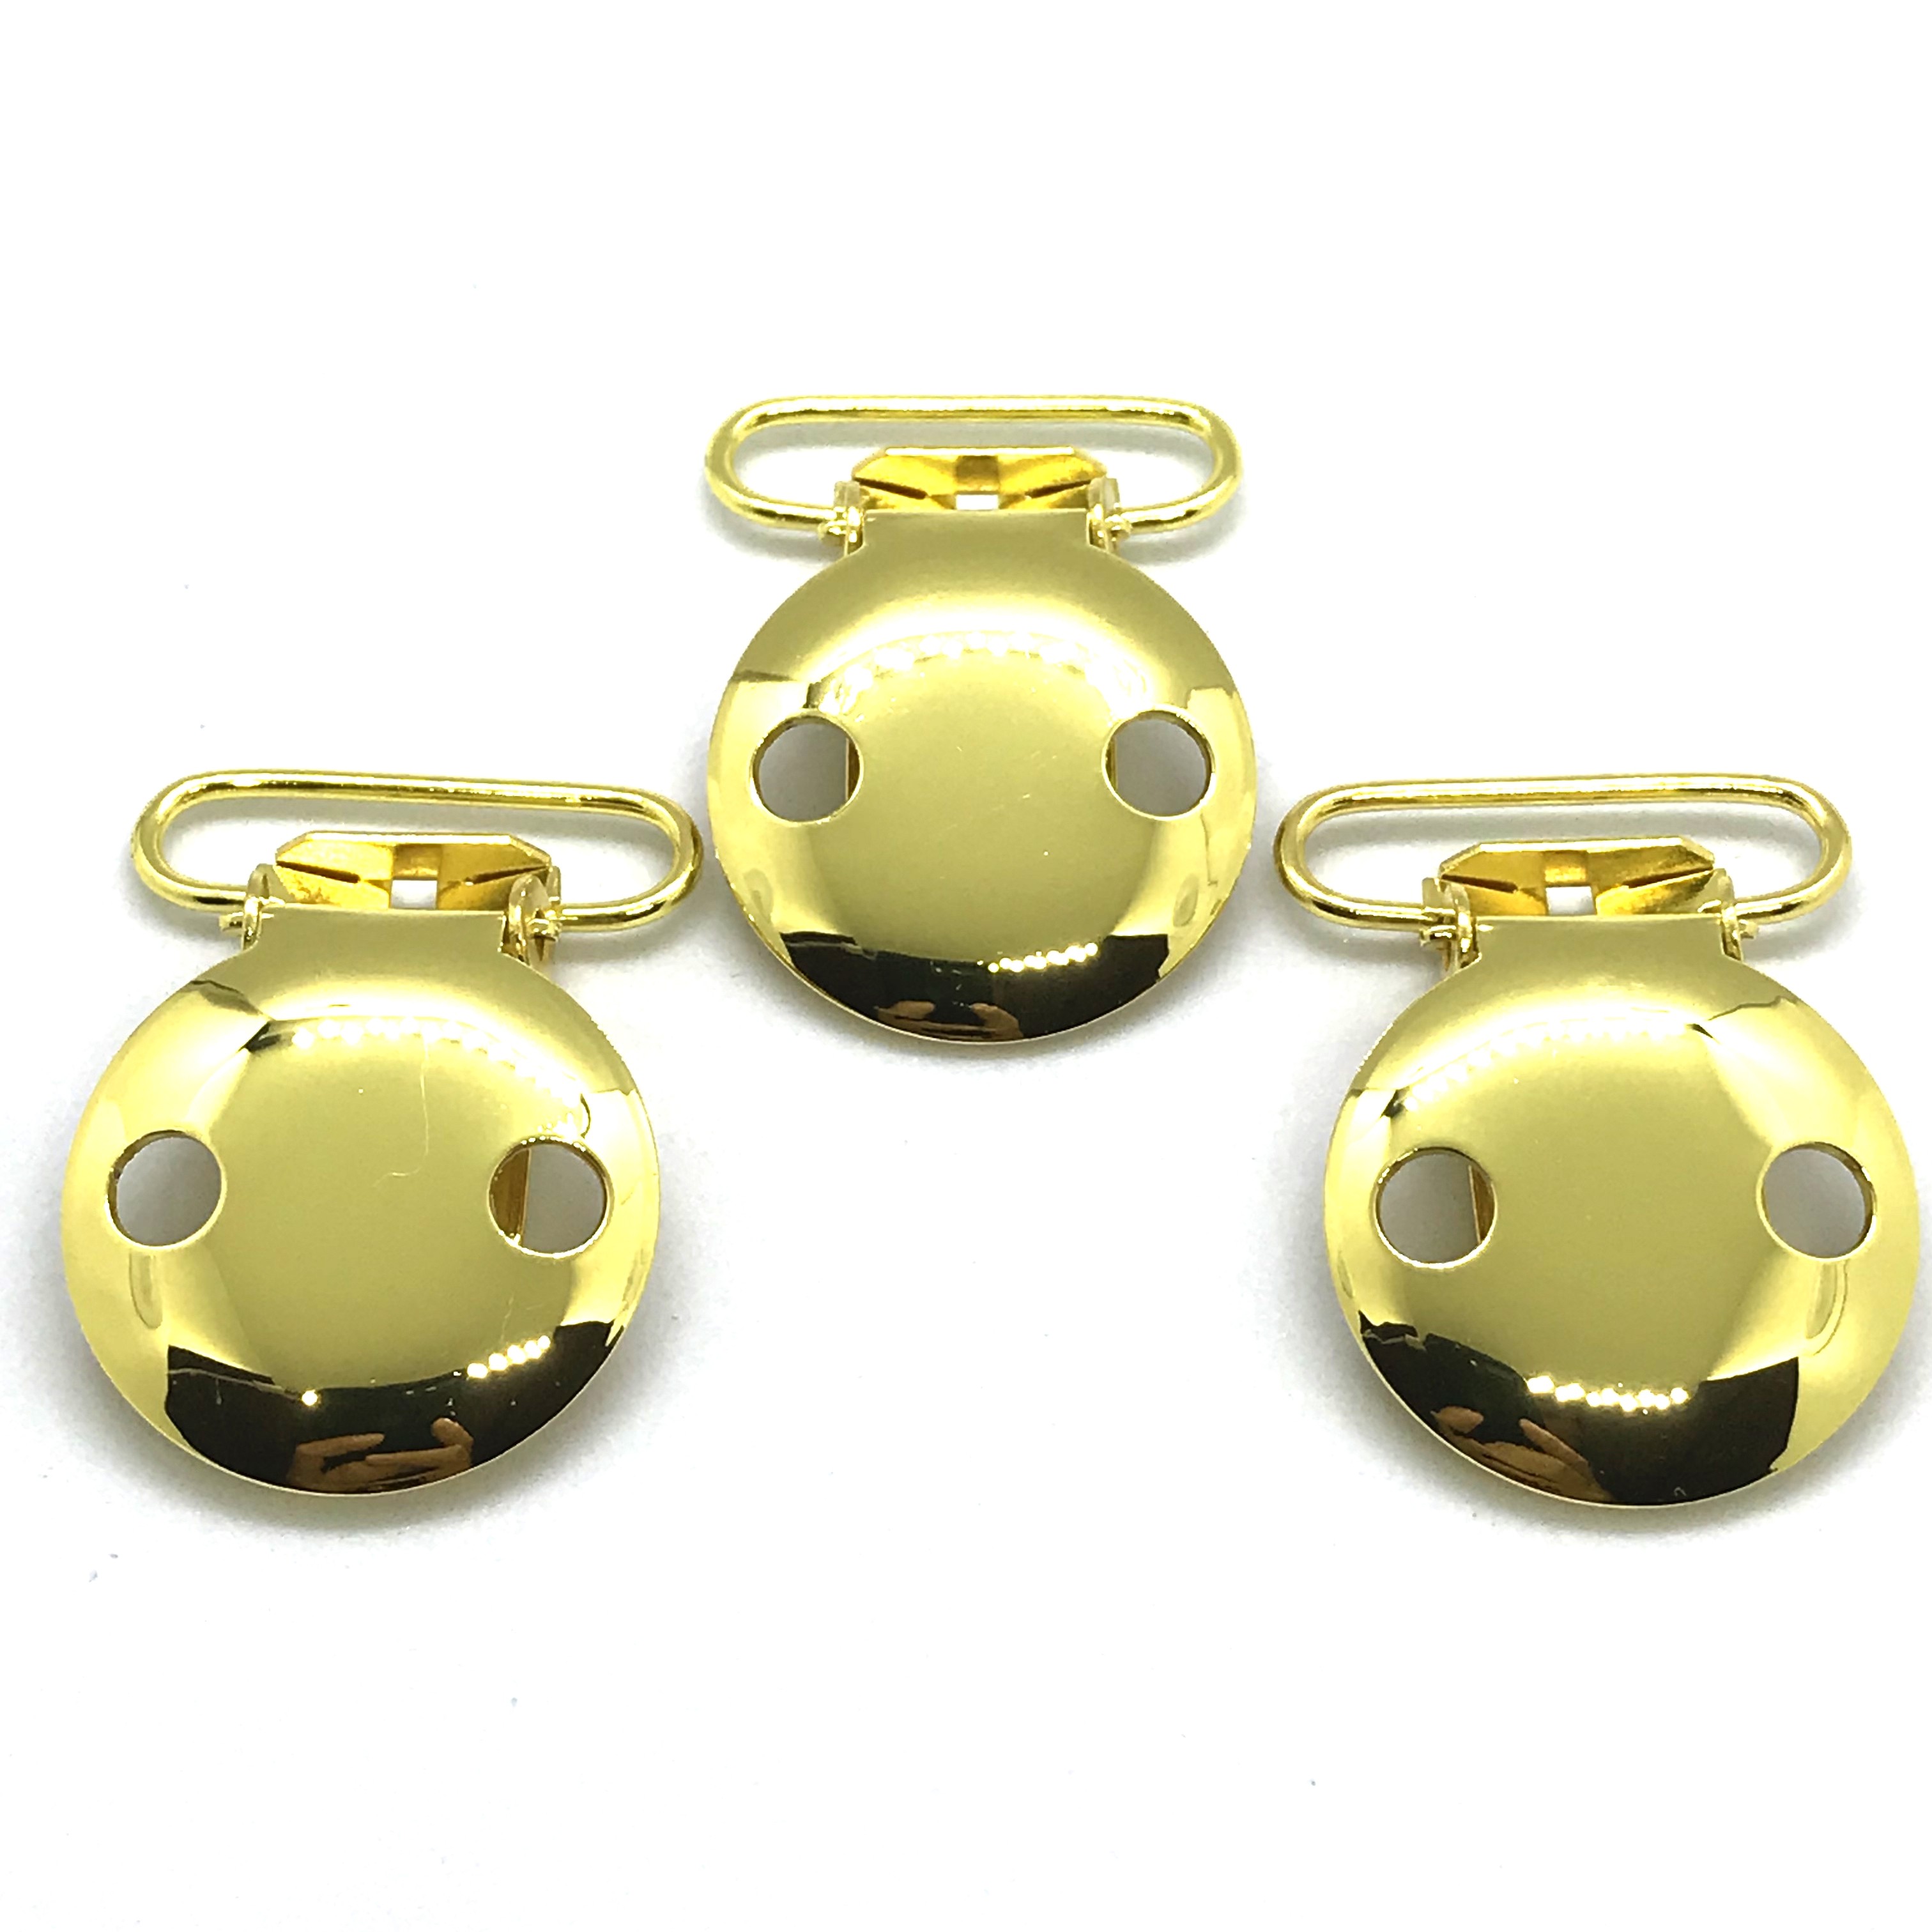 China Gold  25mm 2 Holes Pacifier Clips EN-12586 Passed